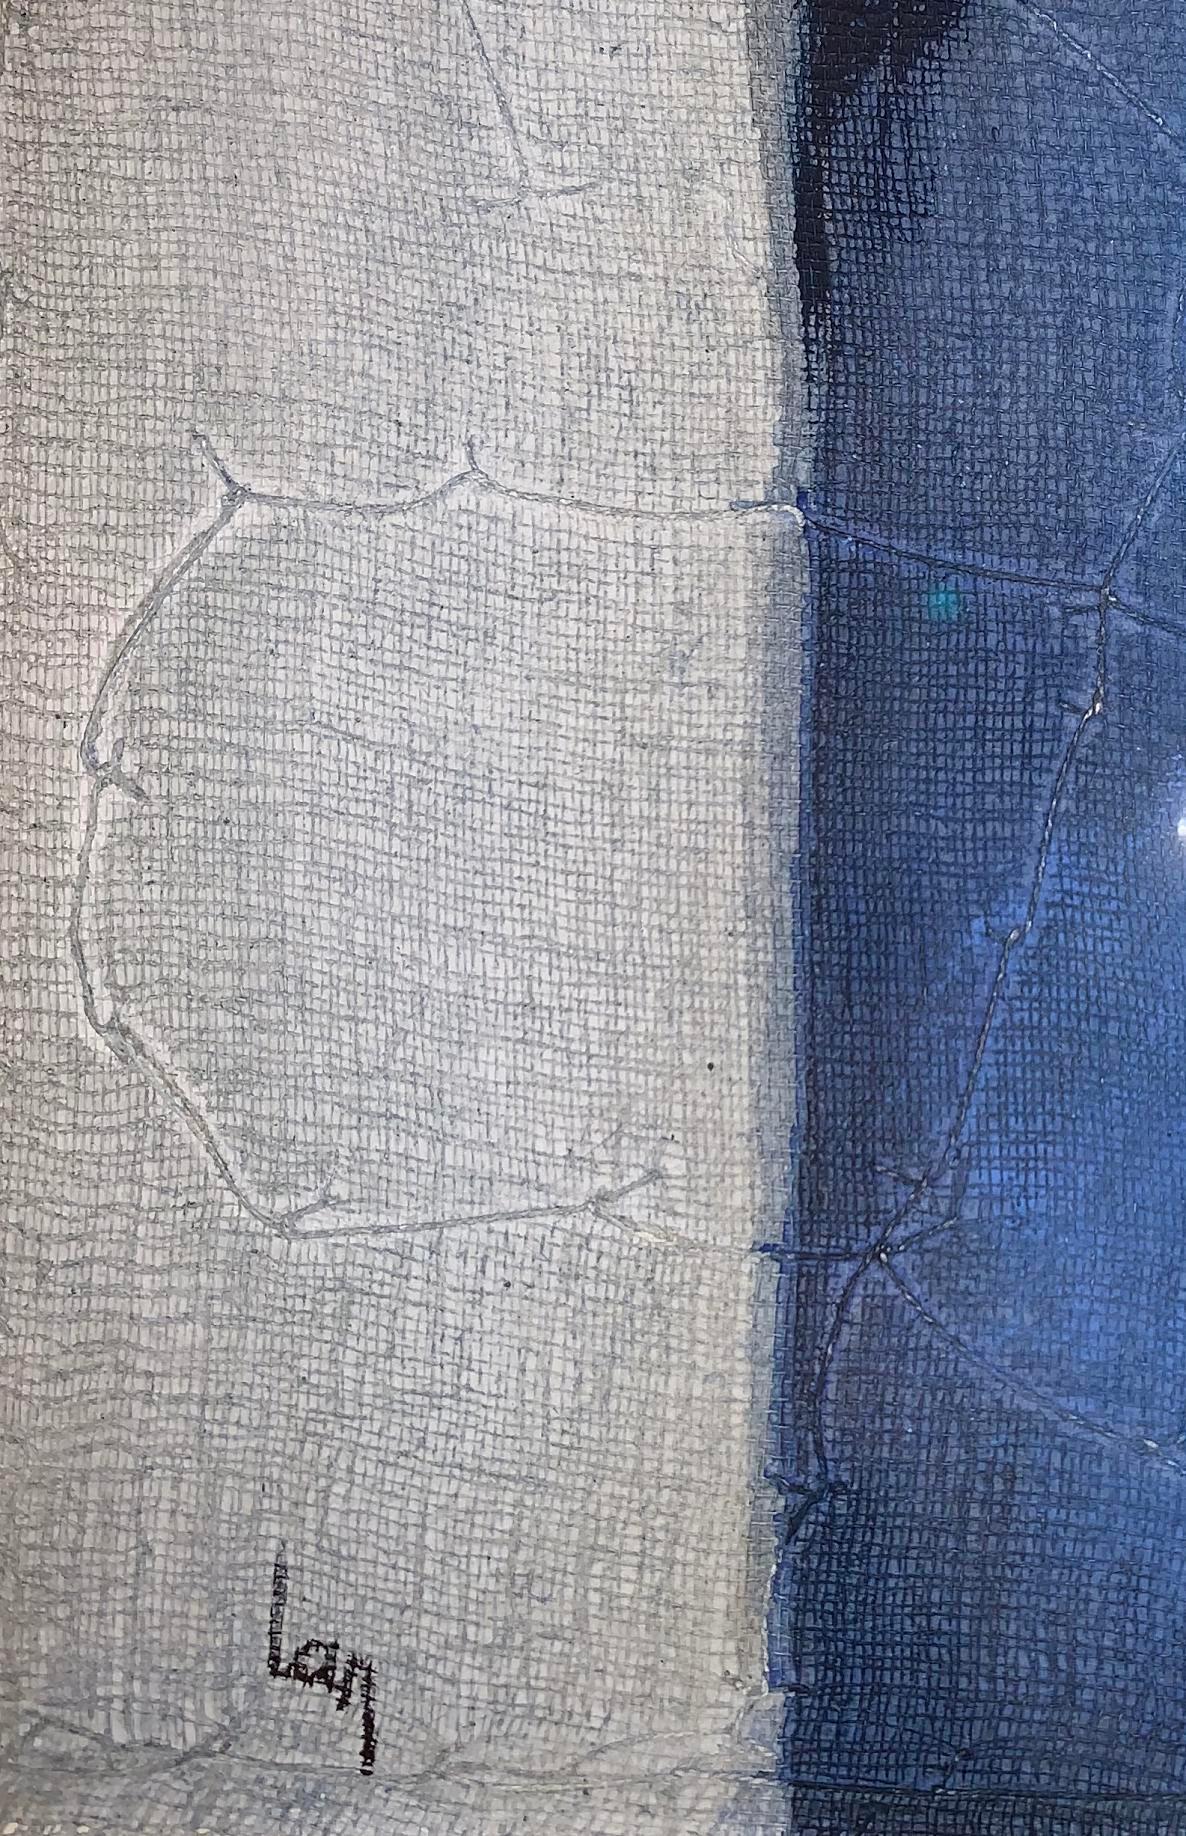 Contemporary Belgian artist Diane Petry creates her own three layer canvas using pima cotton, gauze and fine paper
Raw edges and applied threads add texture and dimension
All artwork can be commissioned for any size and color